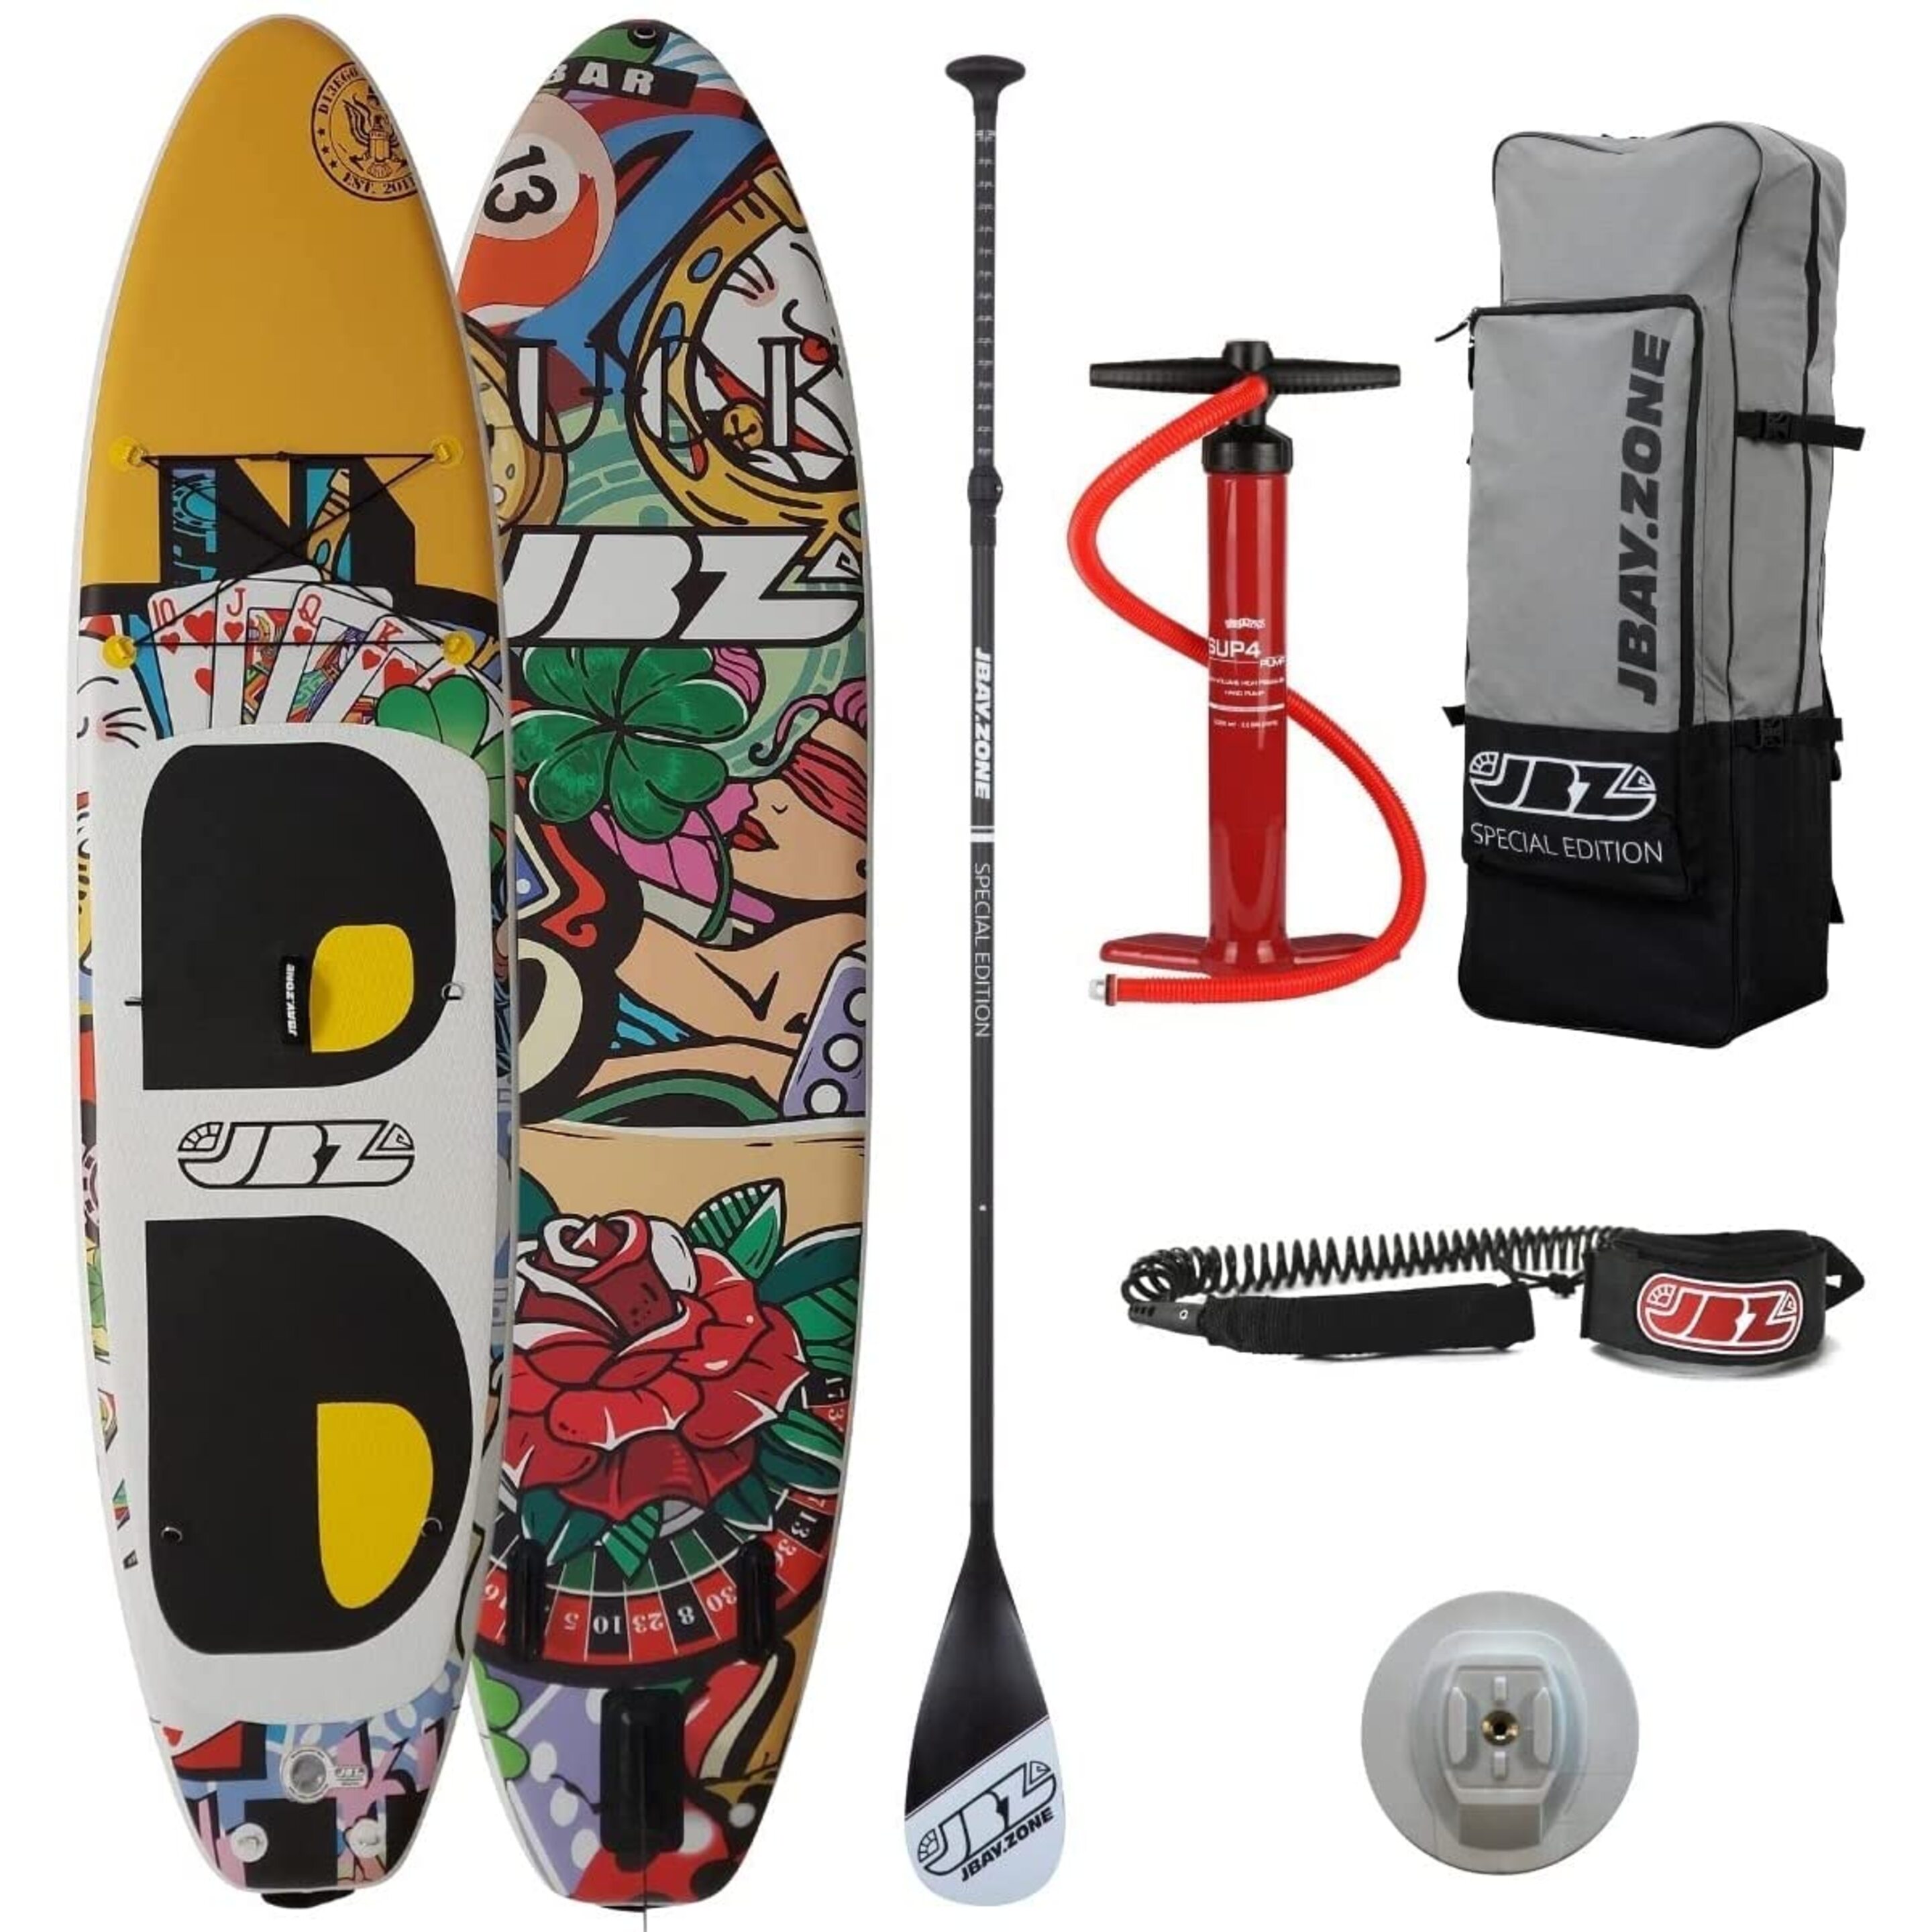 Tabla De Stand Up Paddle Surf Sup Hinchable Jbay.zone D13ego Luck Edition - Amarillo/Negro MKP